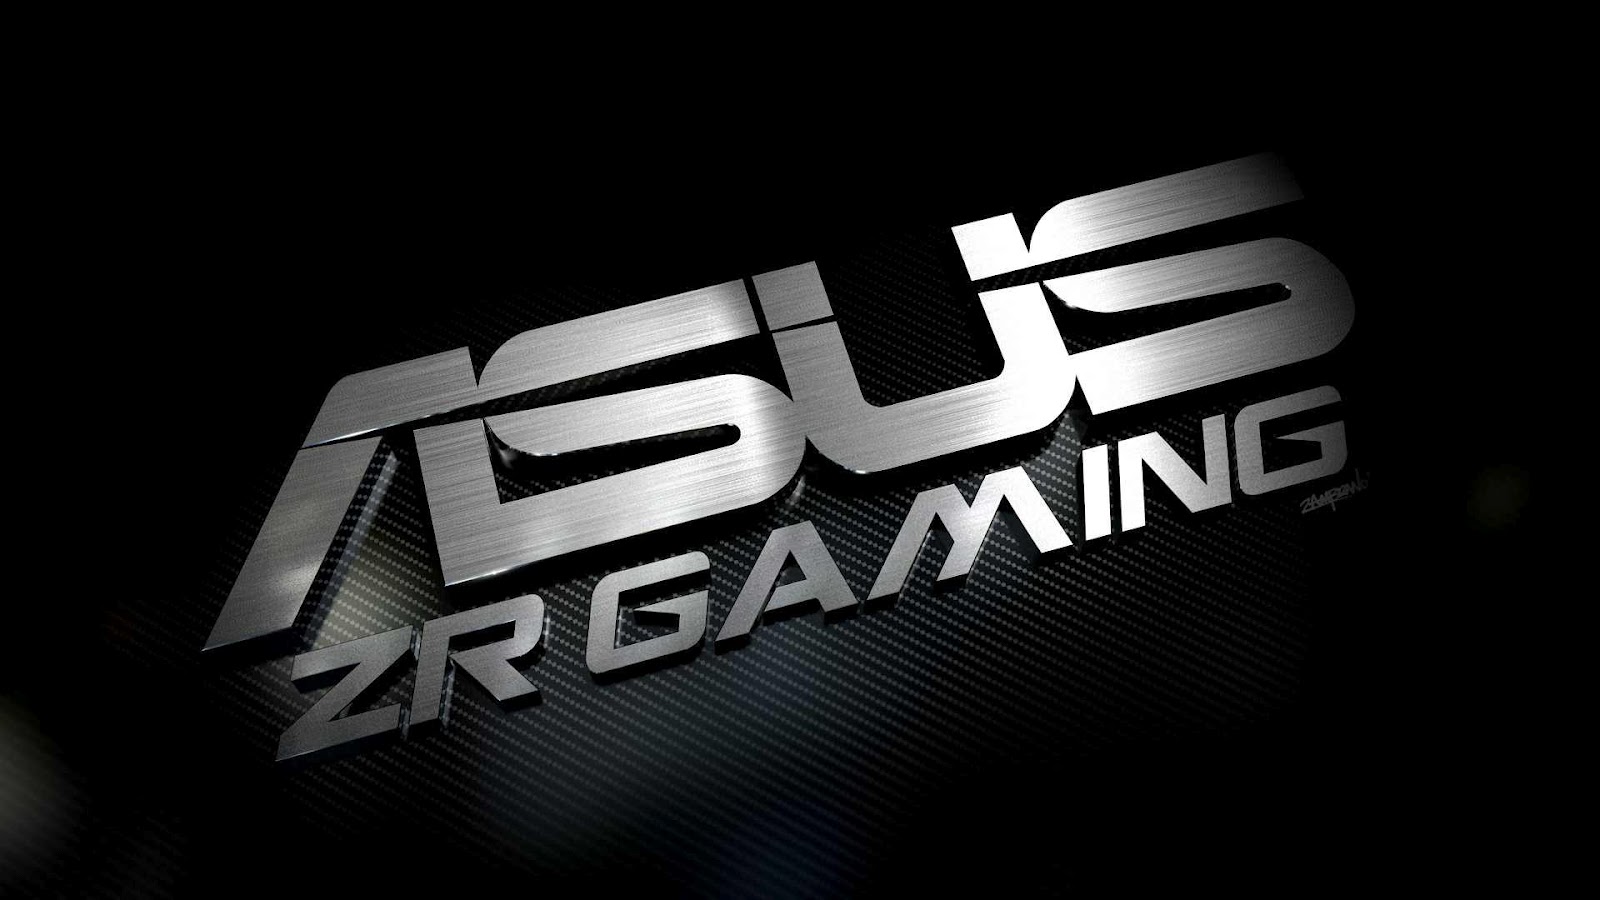 Free Hd Wallpapers Asus HD Wallpapers 1600x900